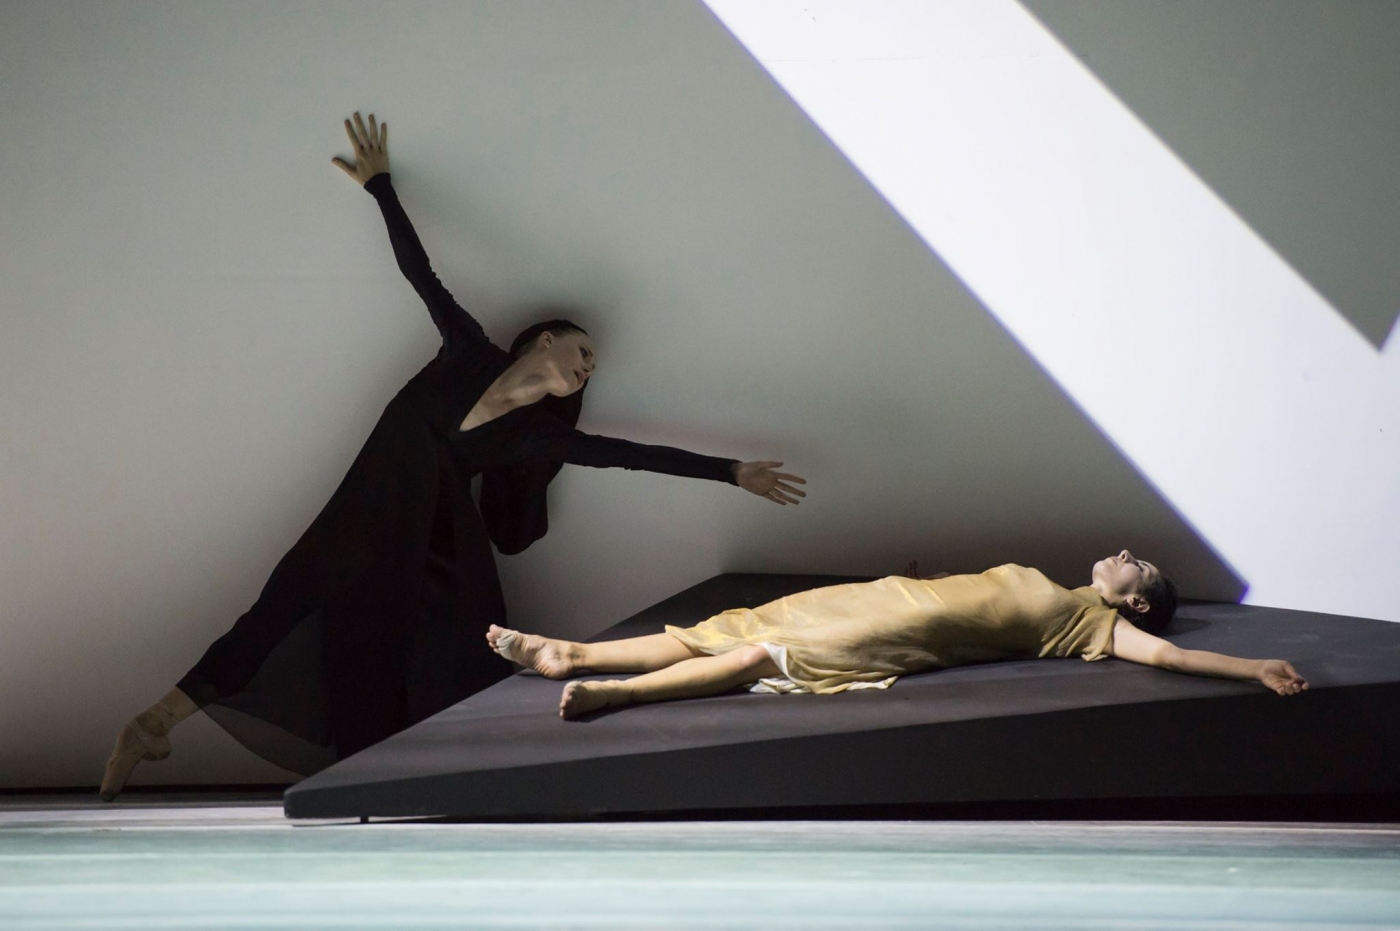 Herald Interview] Monte-Carlo Ballet's minimalist 'Romeo and Juliet' from  Maillot